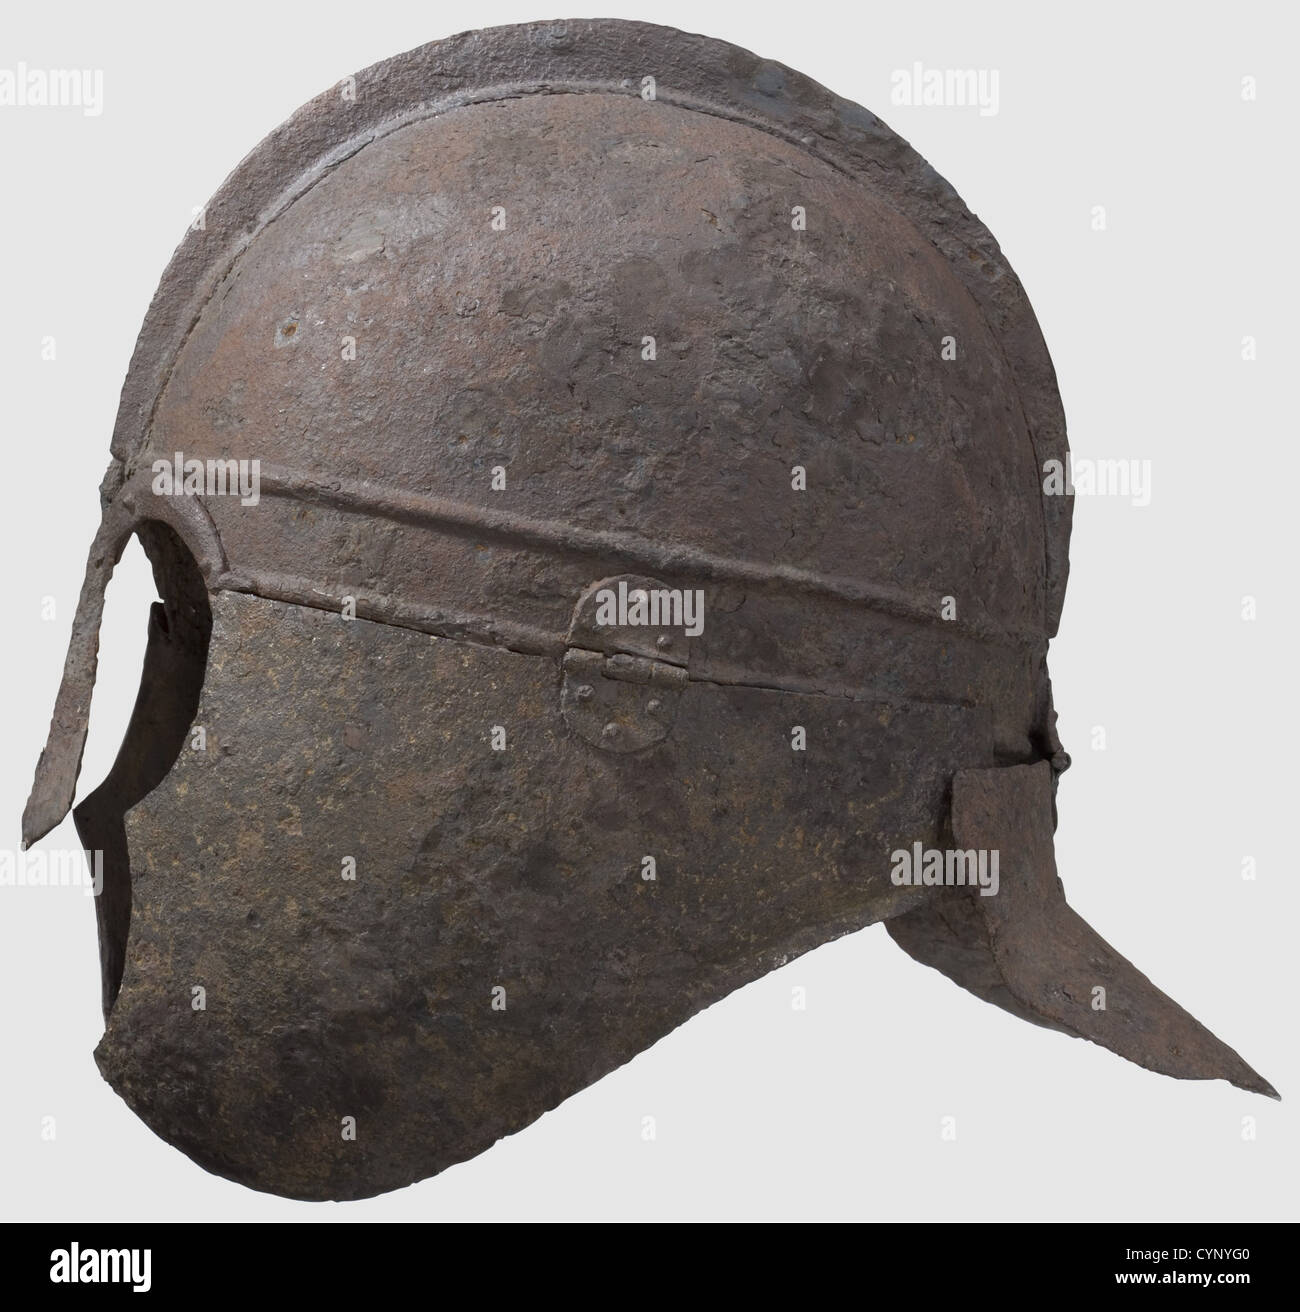 A late Roman iron helmet,circa 4th/5th century A.D.Formed of several sections hinged and riveted in place,the domed cap with a brow band off set by horizontal ribs,the two halves of the cap joined to a central ridge by rivets,the nose-guard and ornamental arching brows riveted to the brow band,the cheek-pieces flanged toward the neck and hinged to the brow band,each perforated below the chin,the neck-guard with an everted hemispherical flange hinged to the back of the brow band Height 27.5 cm,Weight 1426 grams.Provenance: American Private Collection,,Additional-Rights-Clearences-Not Available Stock Photo